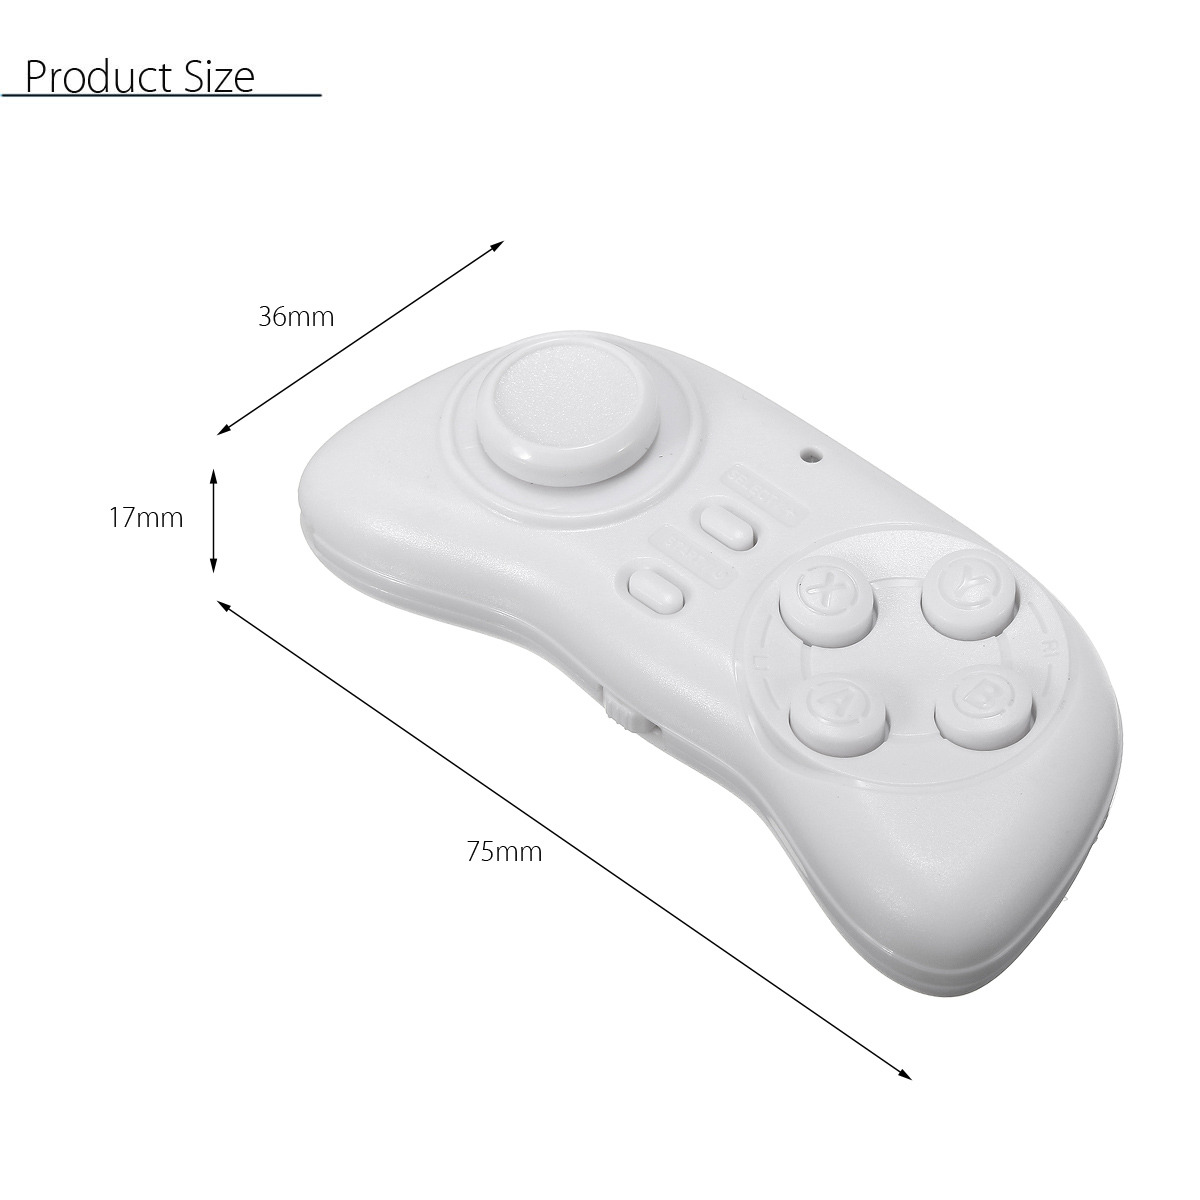 Wireless-Bluetooth-Selfie-Remote-Joystick-Gamepad-VR-Controller-for-IOS-Android-PC-TV-1128009